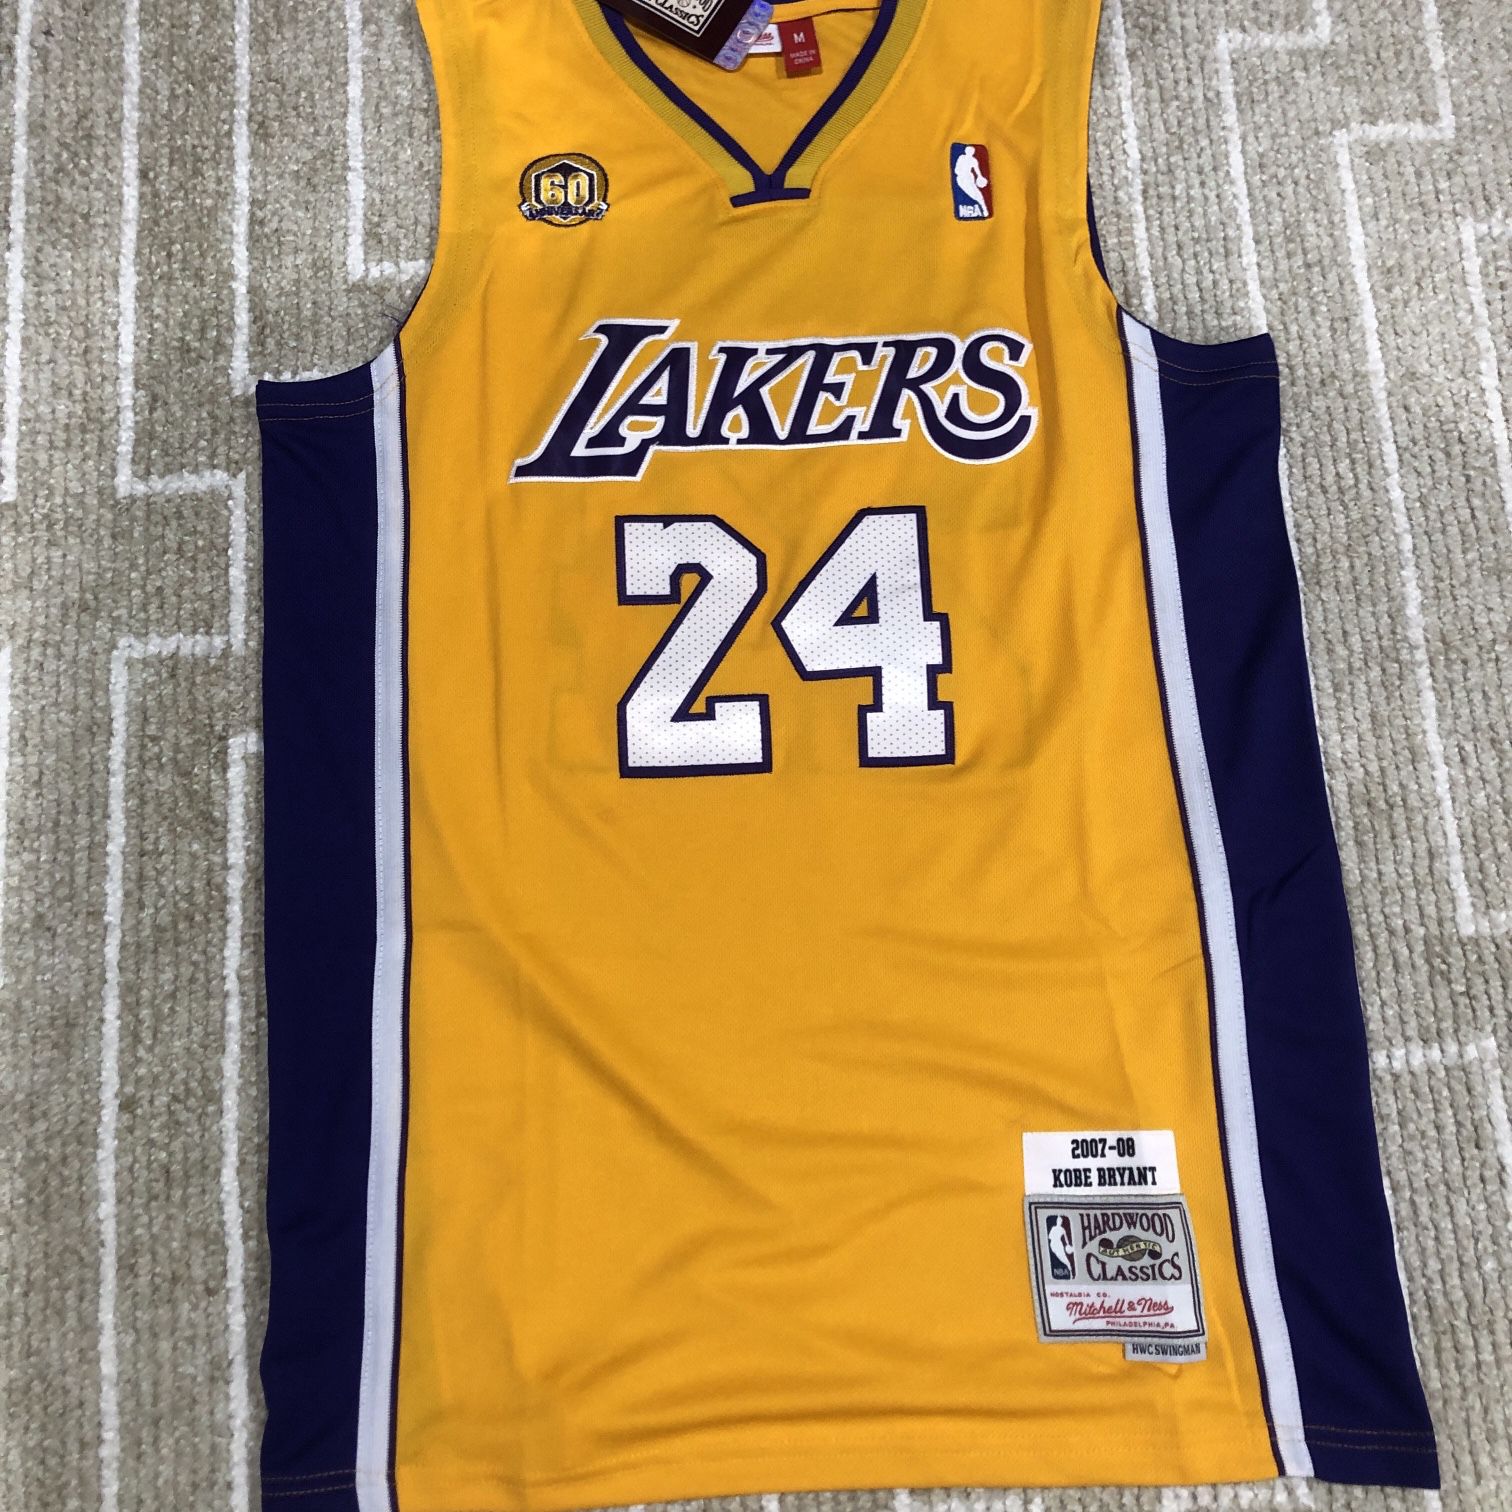 Lakers Jerseys for sale in Reno, Nevada